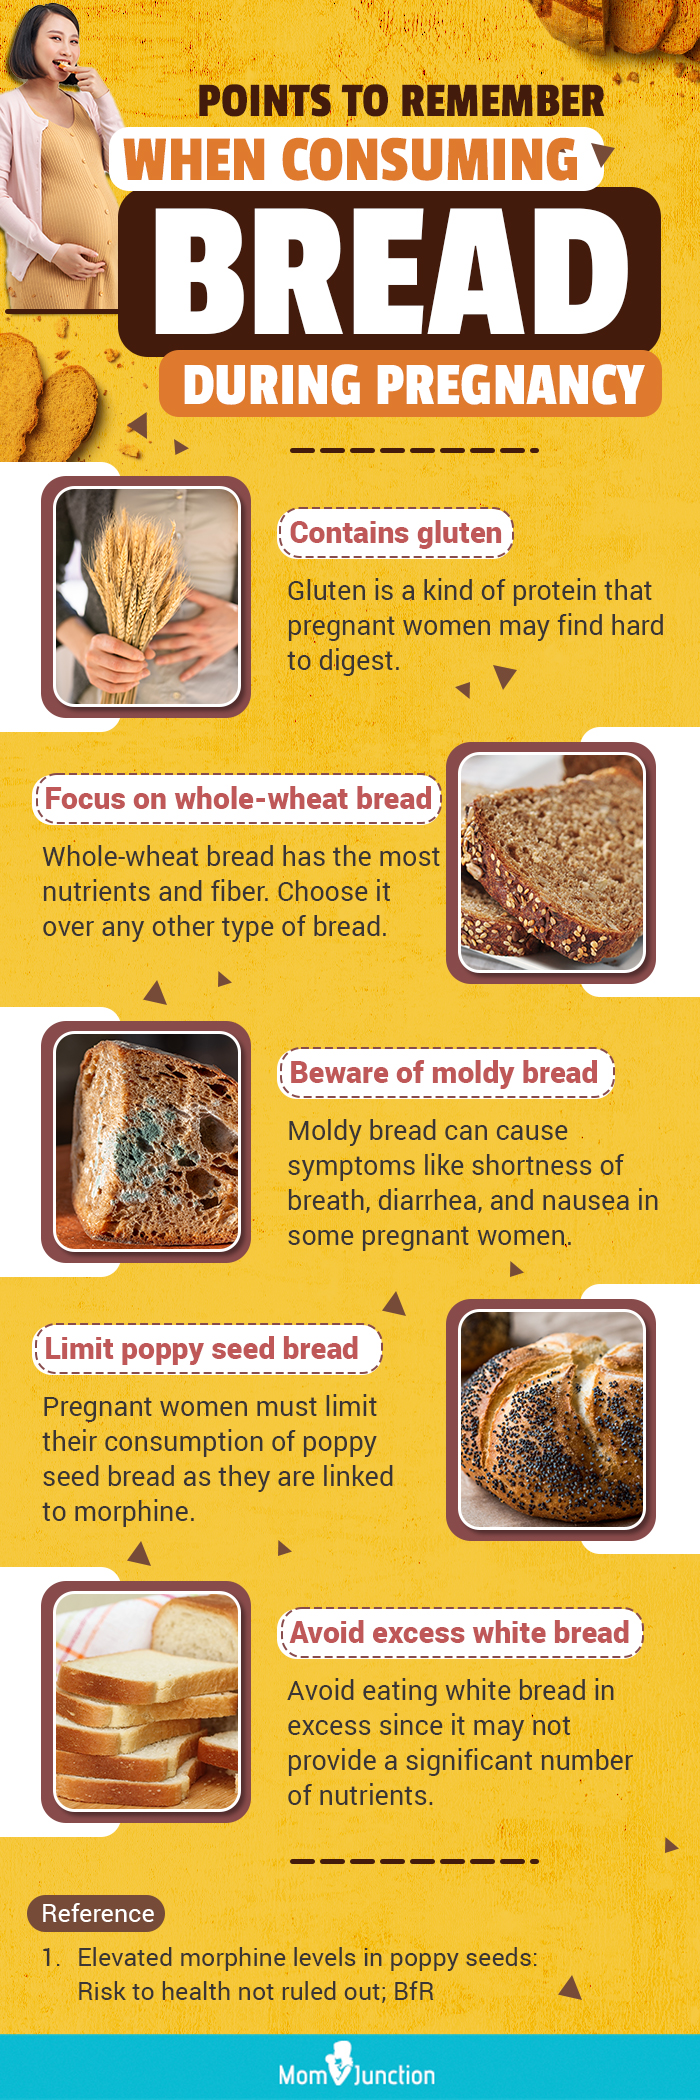 points to remember when consuming bread during pregnancy (infographic)